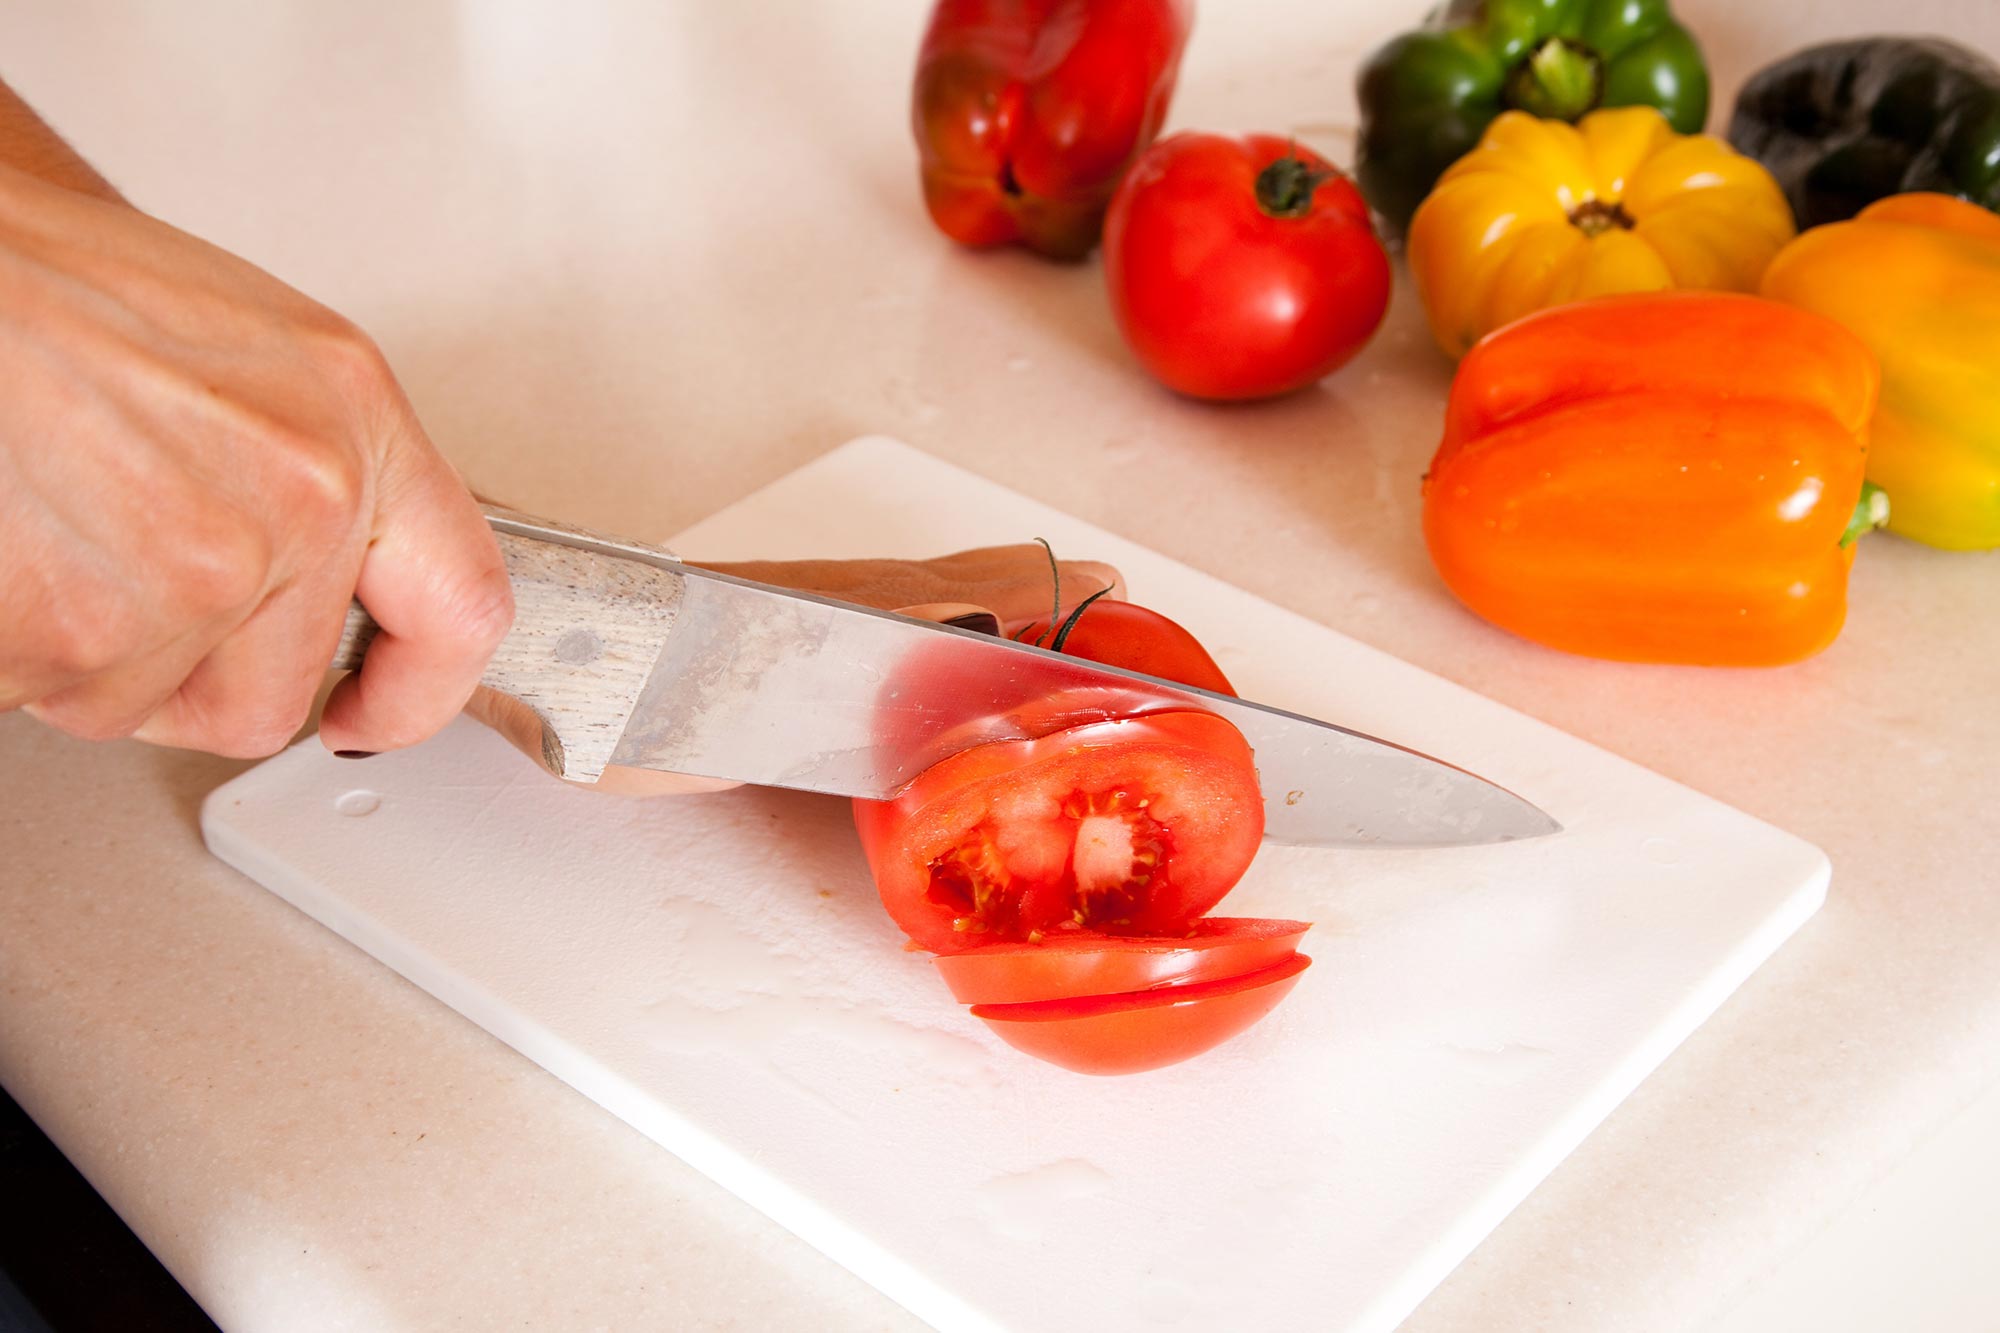 https://scitechdaily.com/images/Slicing-Tomato-Cutting-Board.jpg